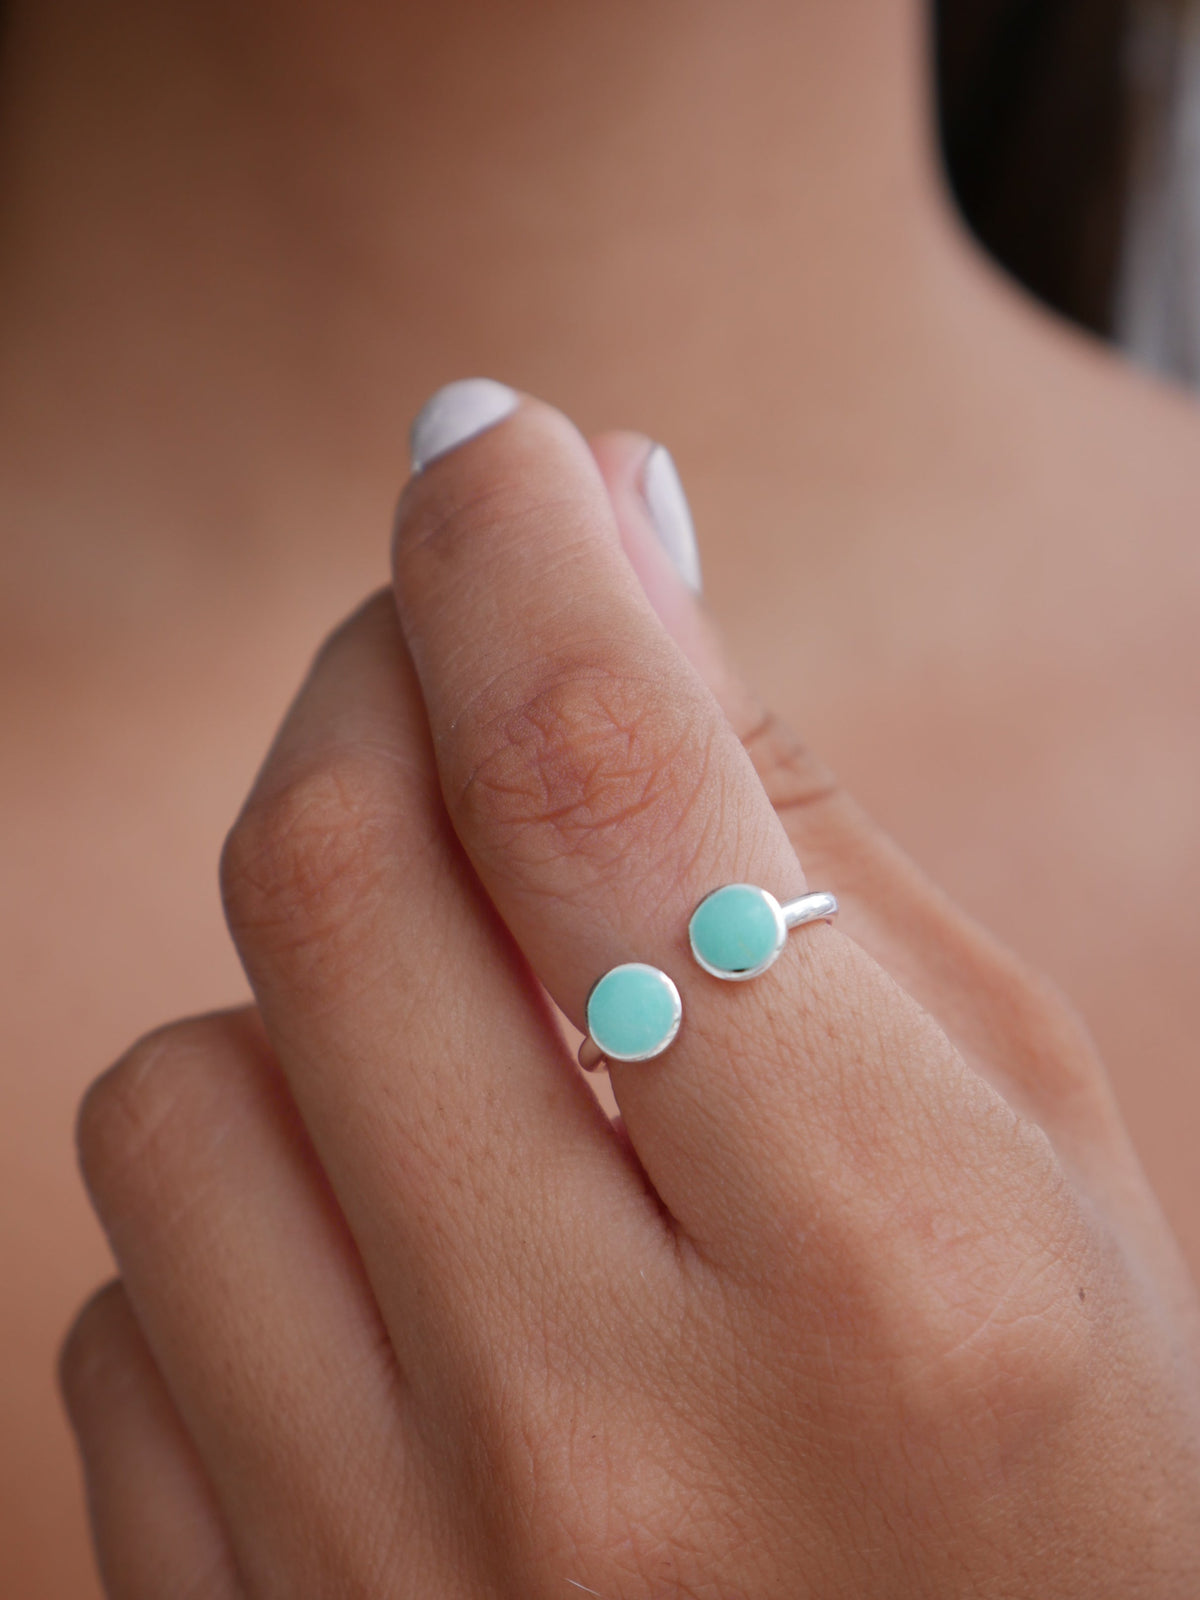 rings, Turquoise rings, silver rings, 925 sterling silver rings, dainty rings, new rings, adjustable rings, trending jewelry, black friday jewelry, christmas gifts, birthday gifts, anniversary gifts, fashion jewelry, cheap jewelry, trending accessories, dainty rings, statement rings, fashion jewelry, waterproof jewelry, tarnish free rings, designer rings, designer jewelry, kesley jewelry, cool rings, gifts ideas, casual jewelry